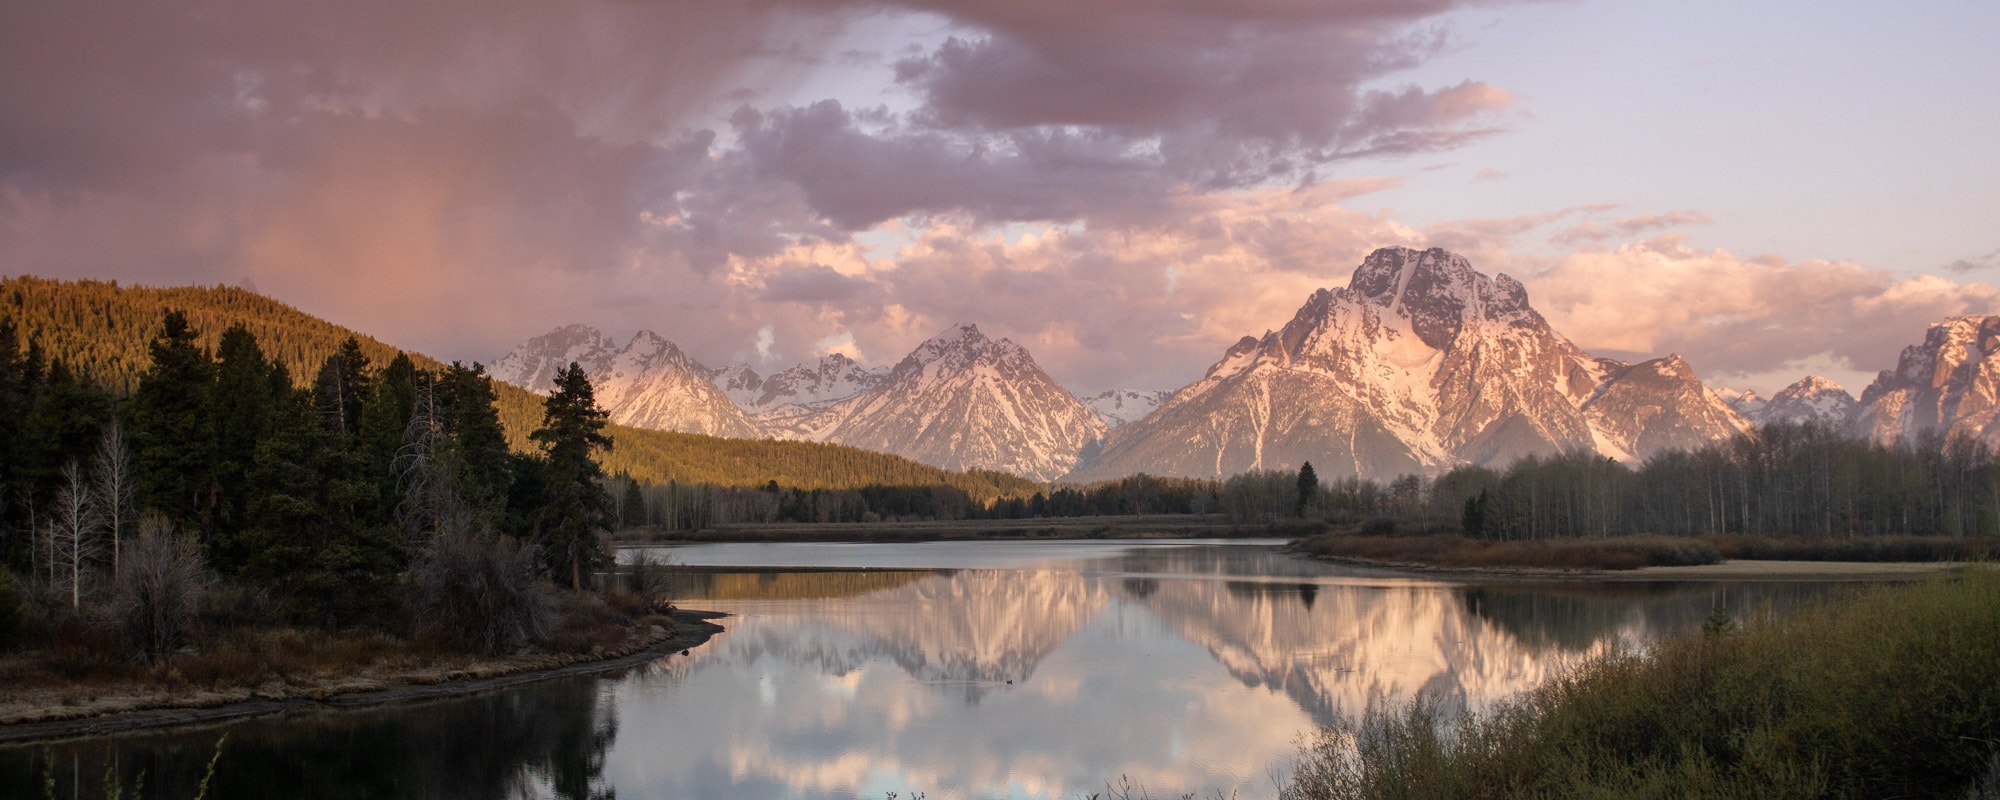 Oxbow Bend sunrise at Grand Teton National Park, Wyoming, one of the best viewpoints in the national parks